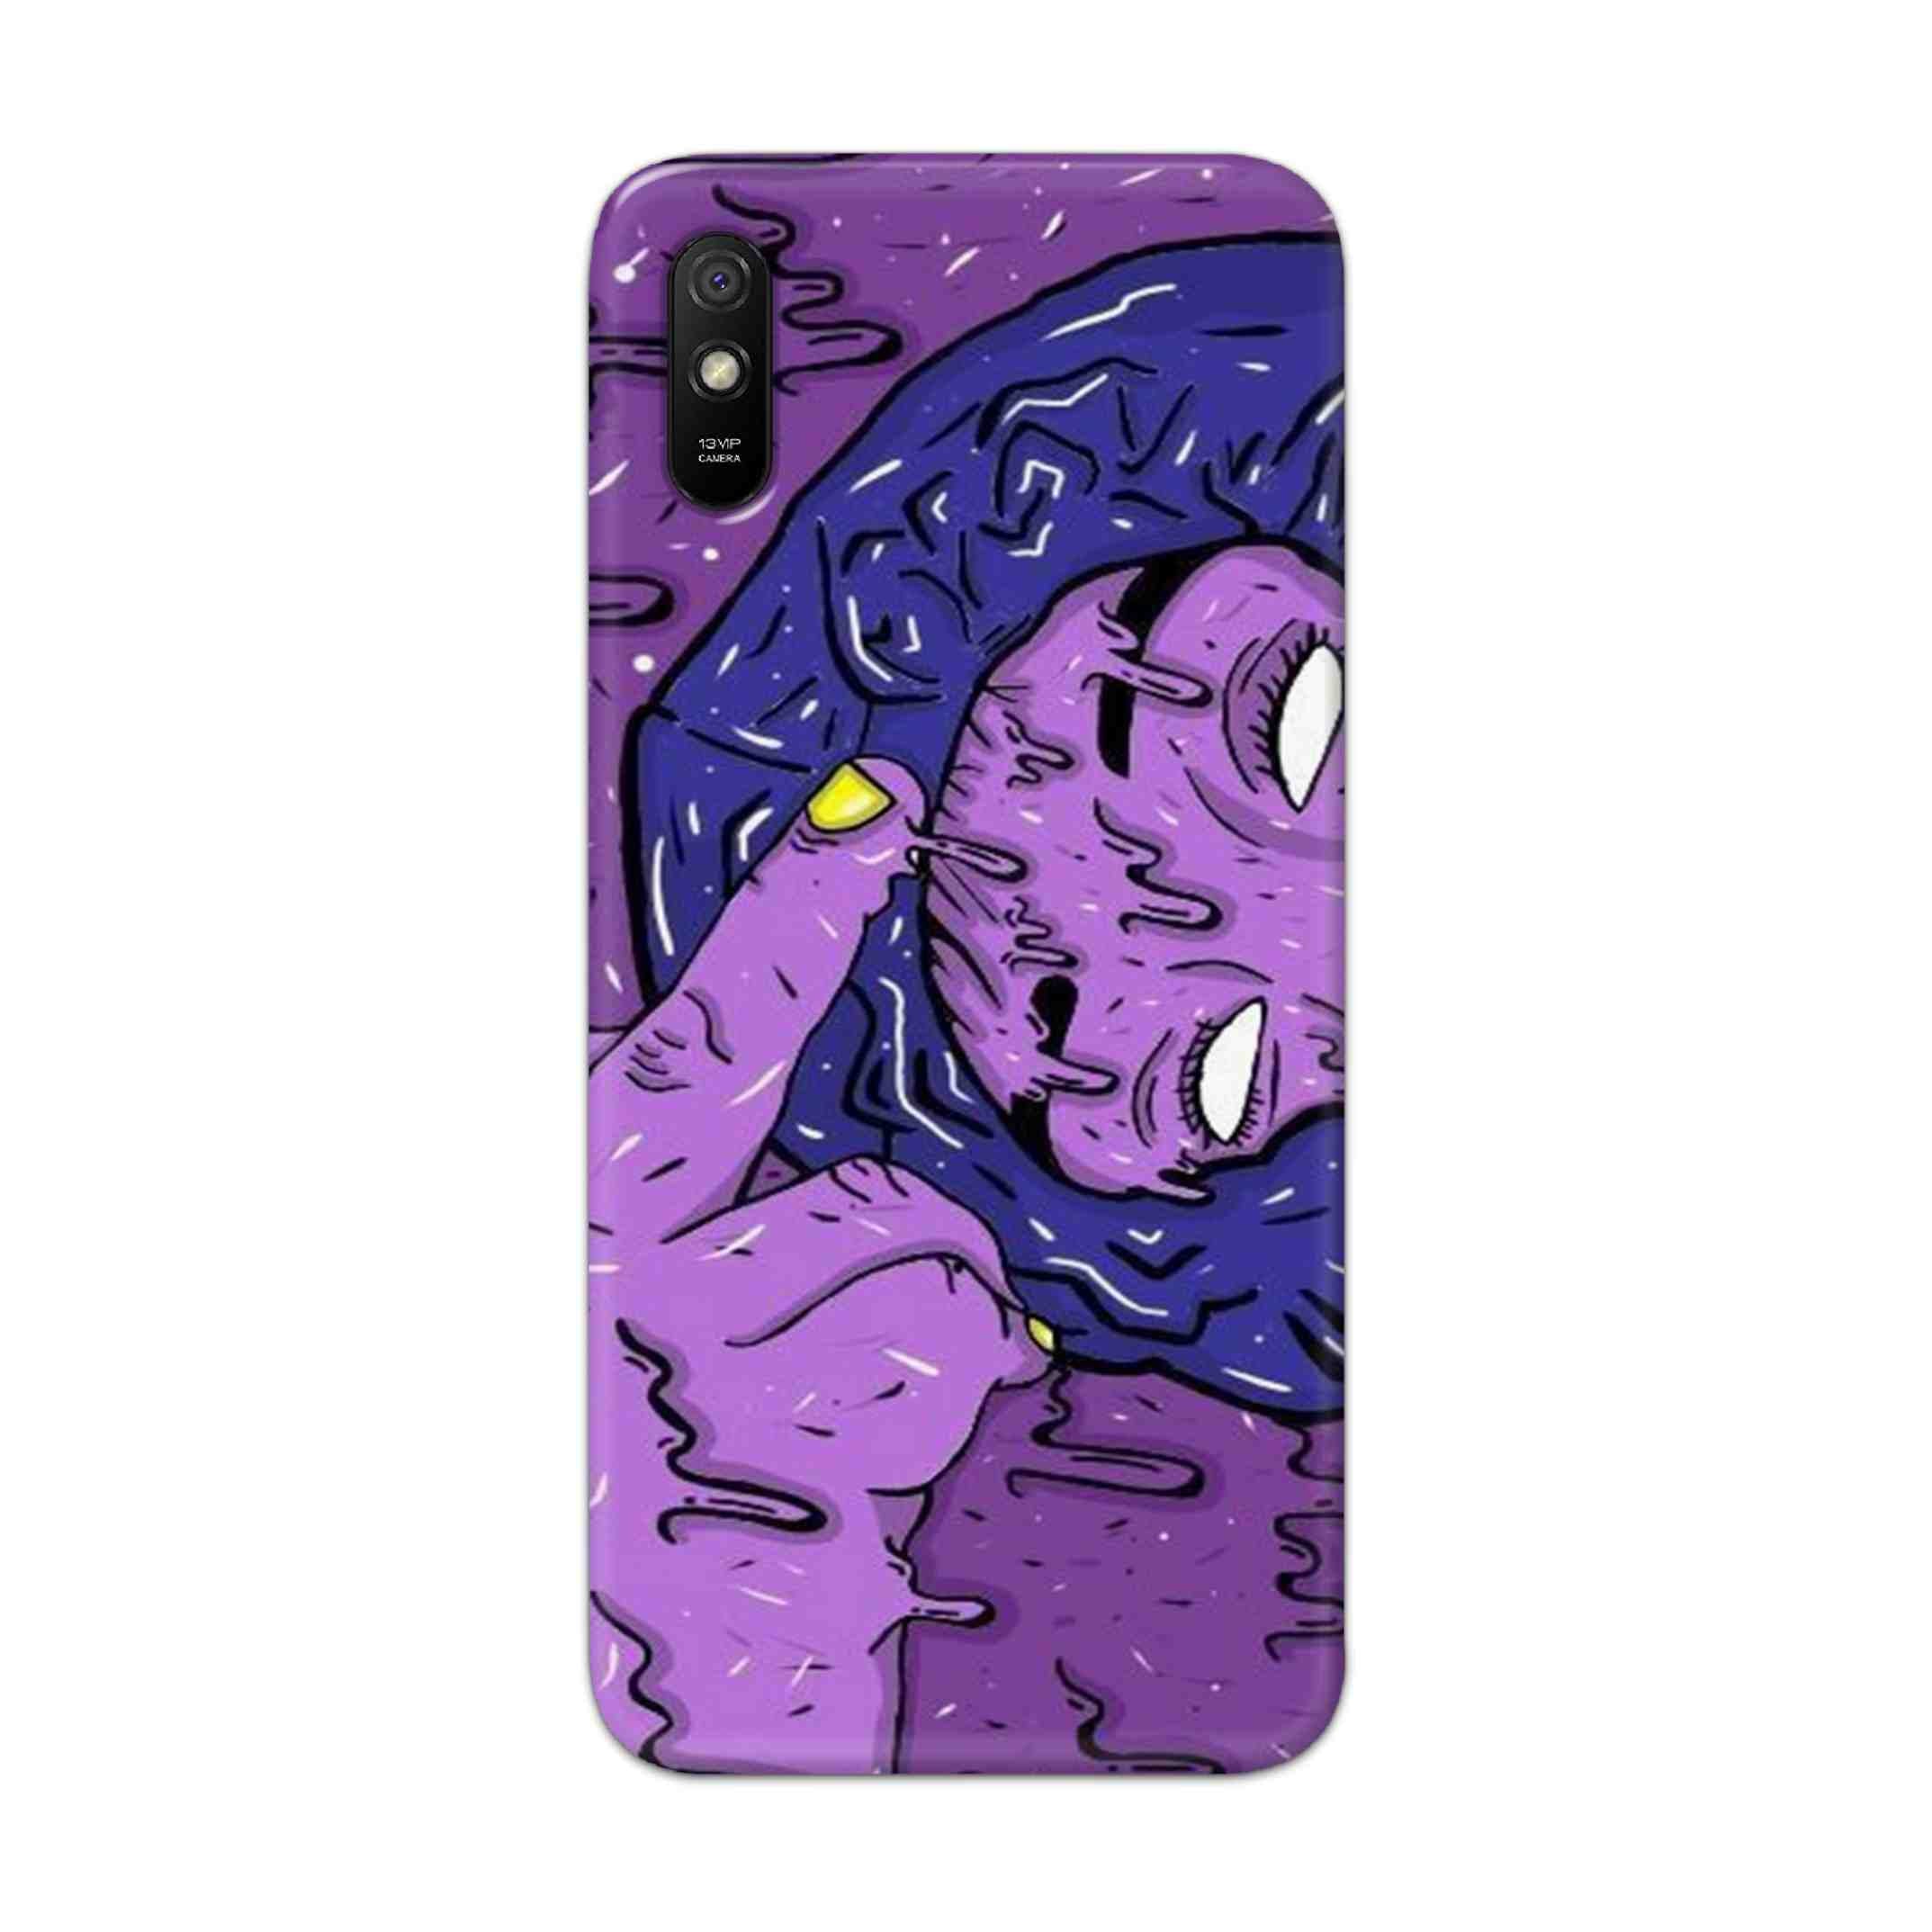 Buy Dashing Art Hard Back Mobile Phone Case Cover For Redmi 9A Online